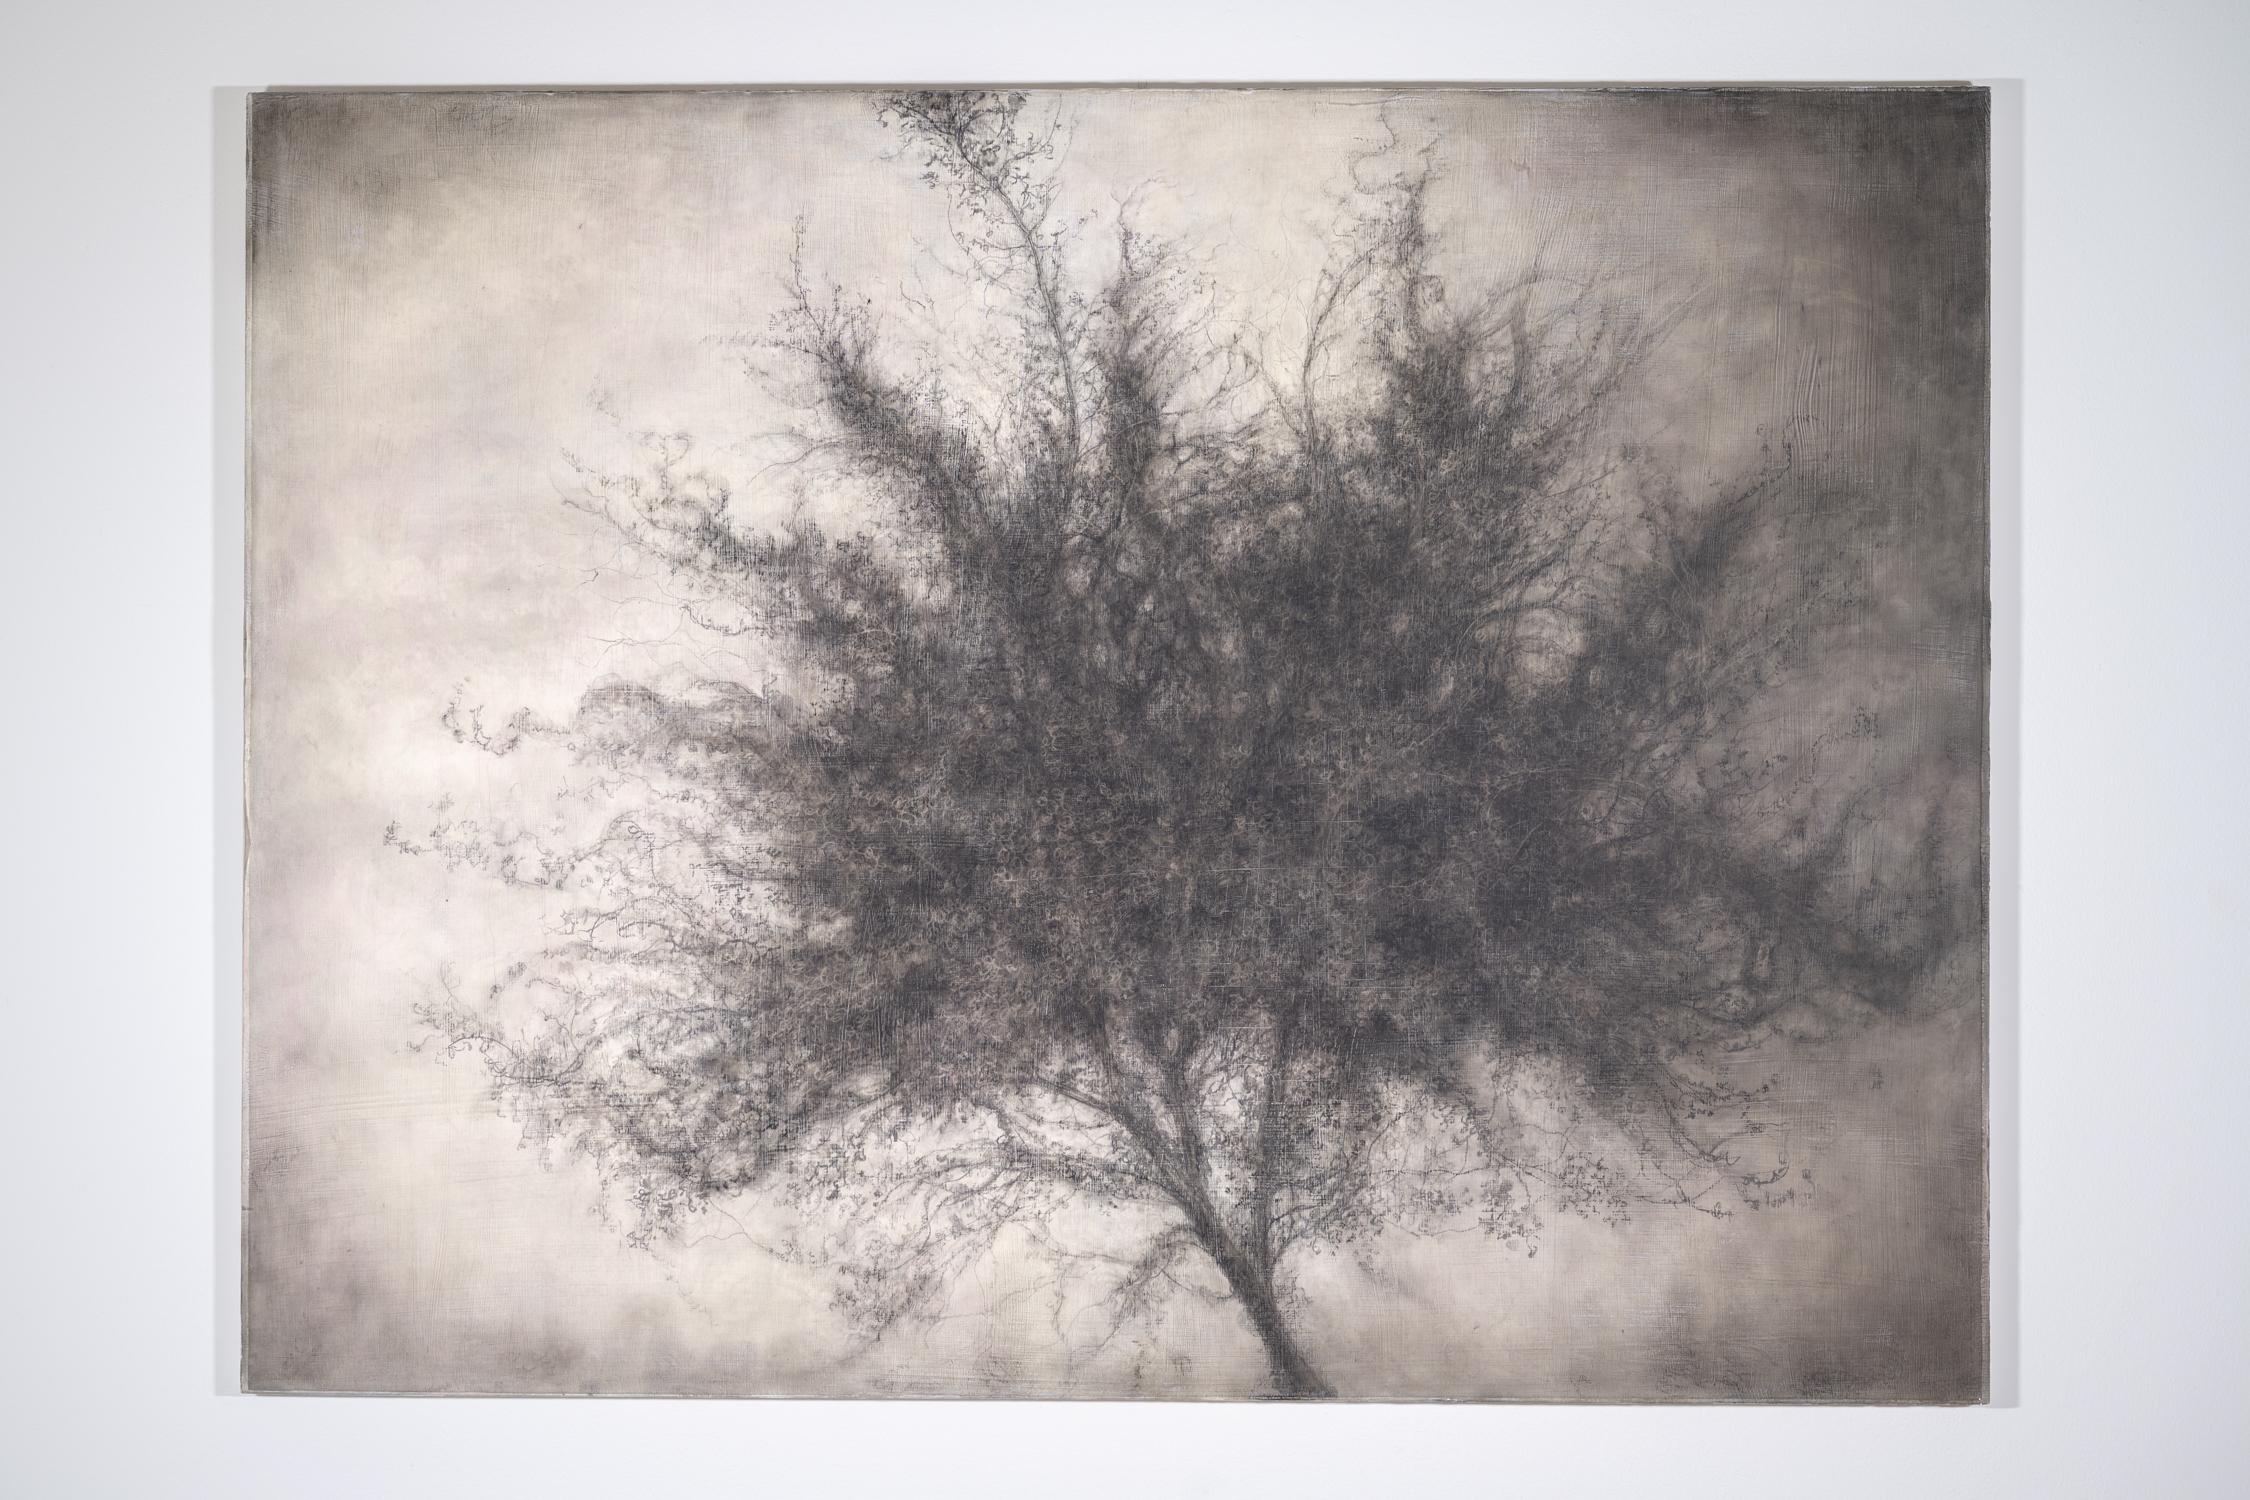 Sprig (Dramatic Charcoal Still Life Drawing of Single Tree, Exquisite Detail) - Art by Sue Bryan